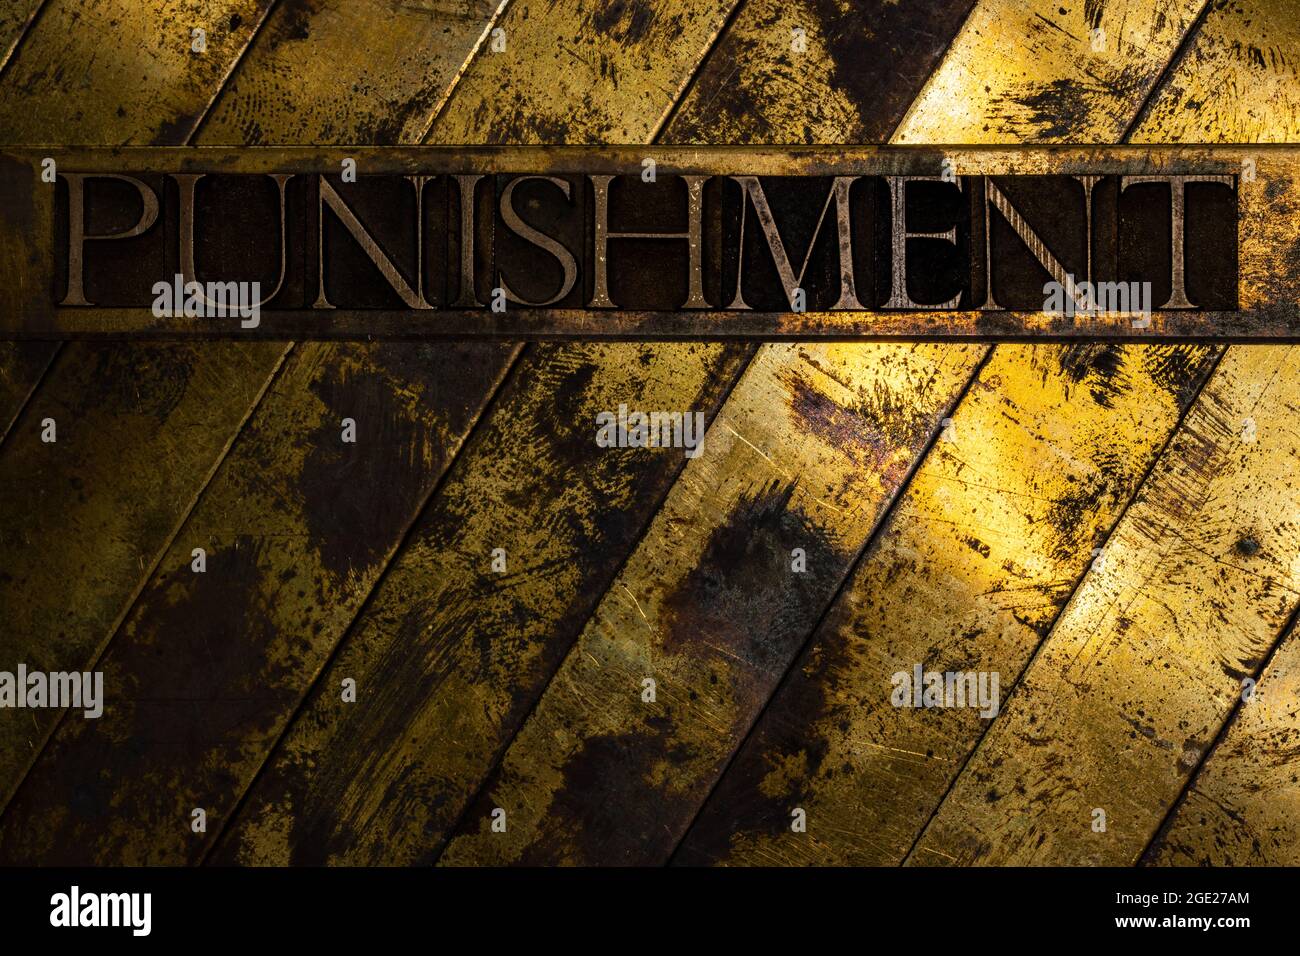 Punishment text formed with real authentic typeset letters on vintage textured silver grunge copper and gold background Stock Photo